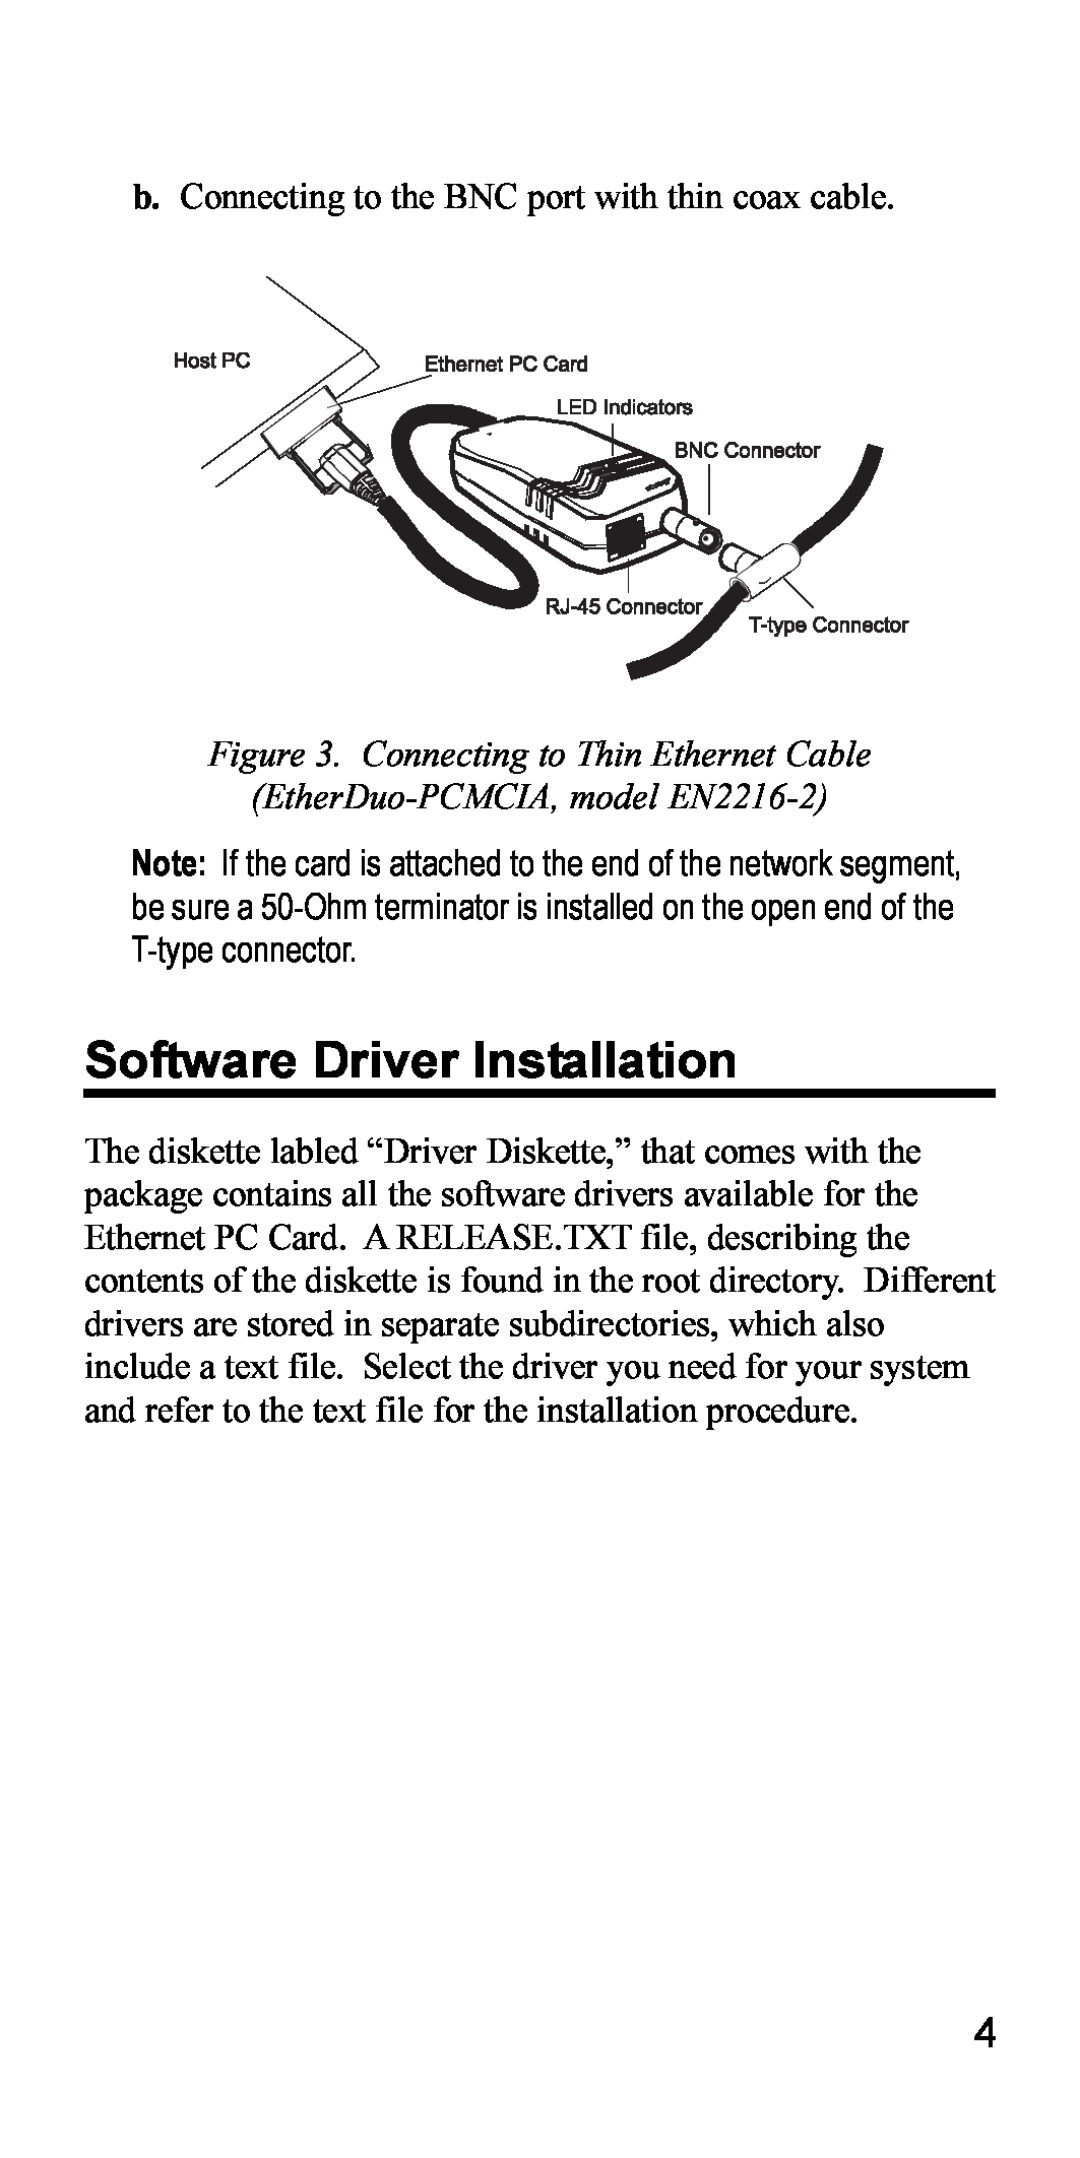 Accton Technology EN2216-2, EN2216-1 specifications Software Driver Installation, Connecting to Thin Ethernet Cable 